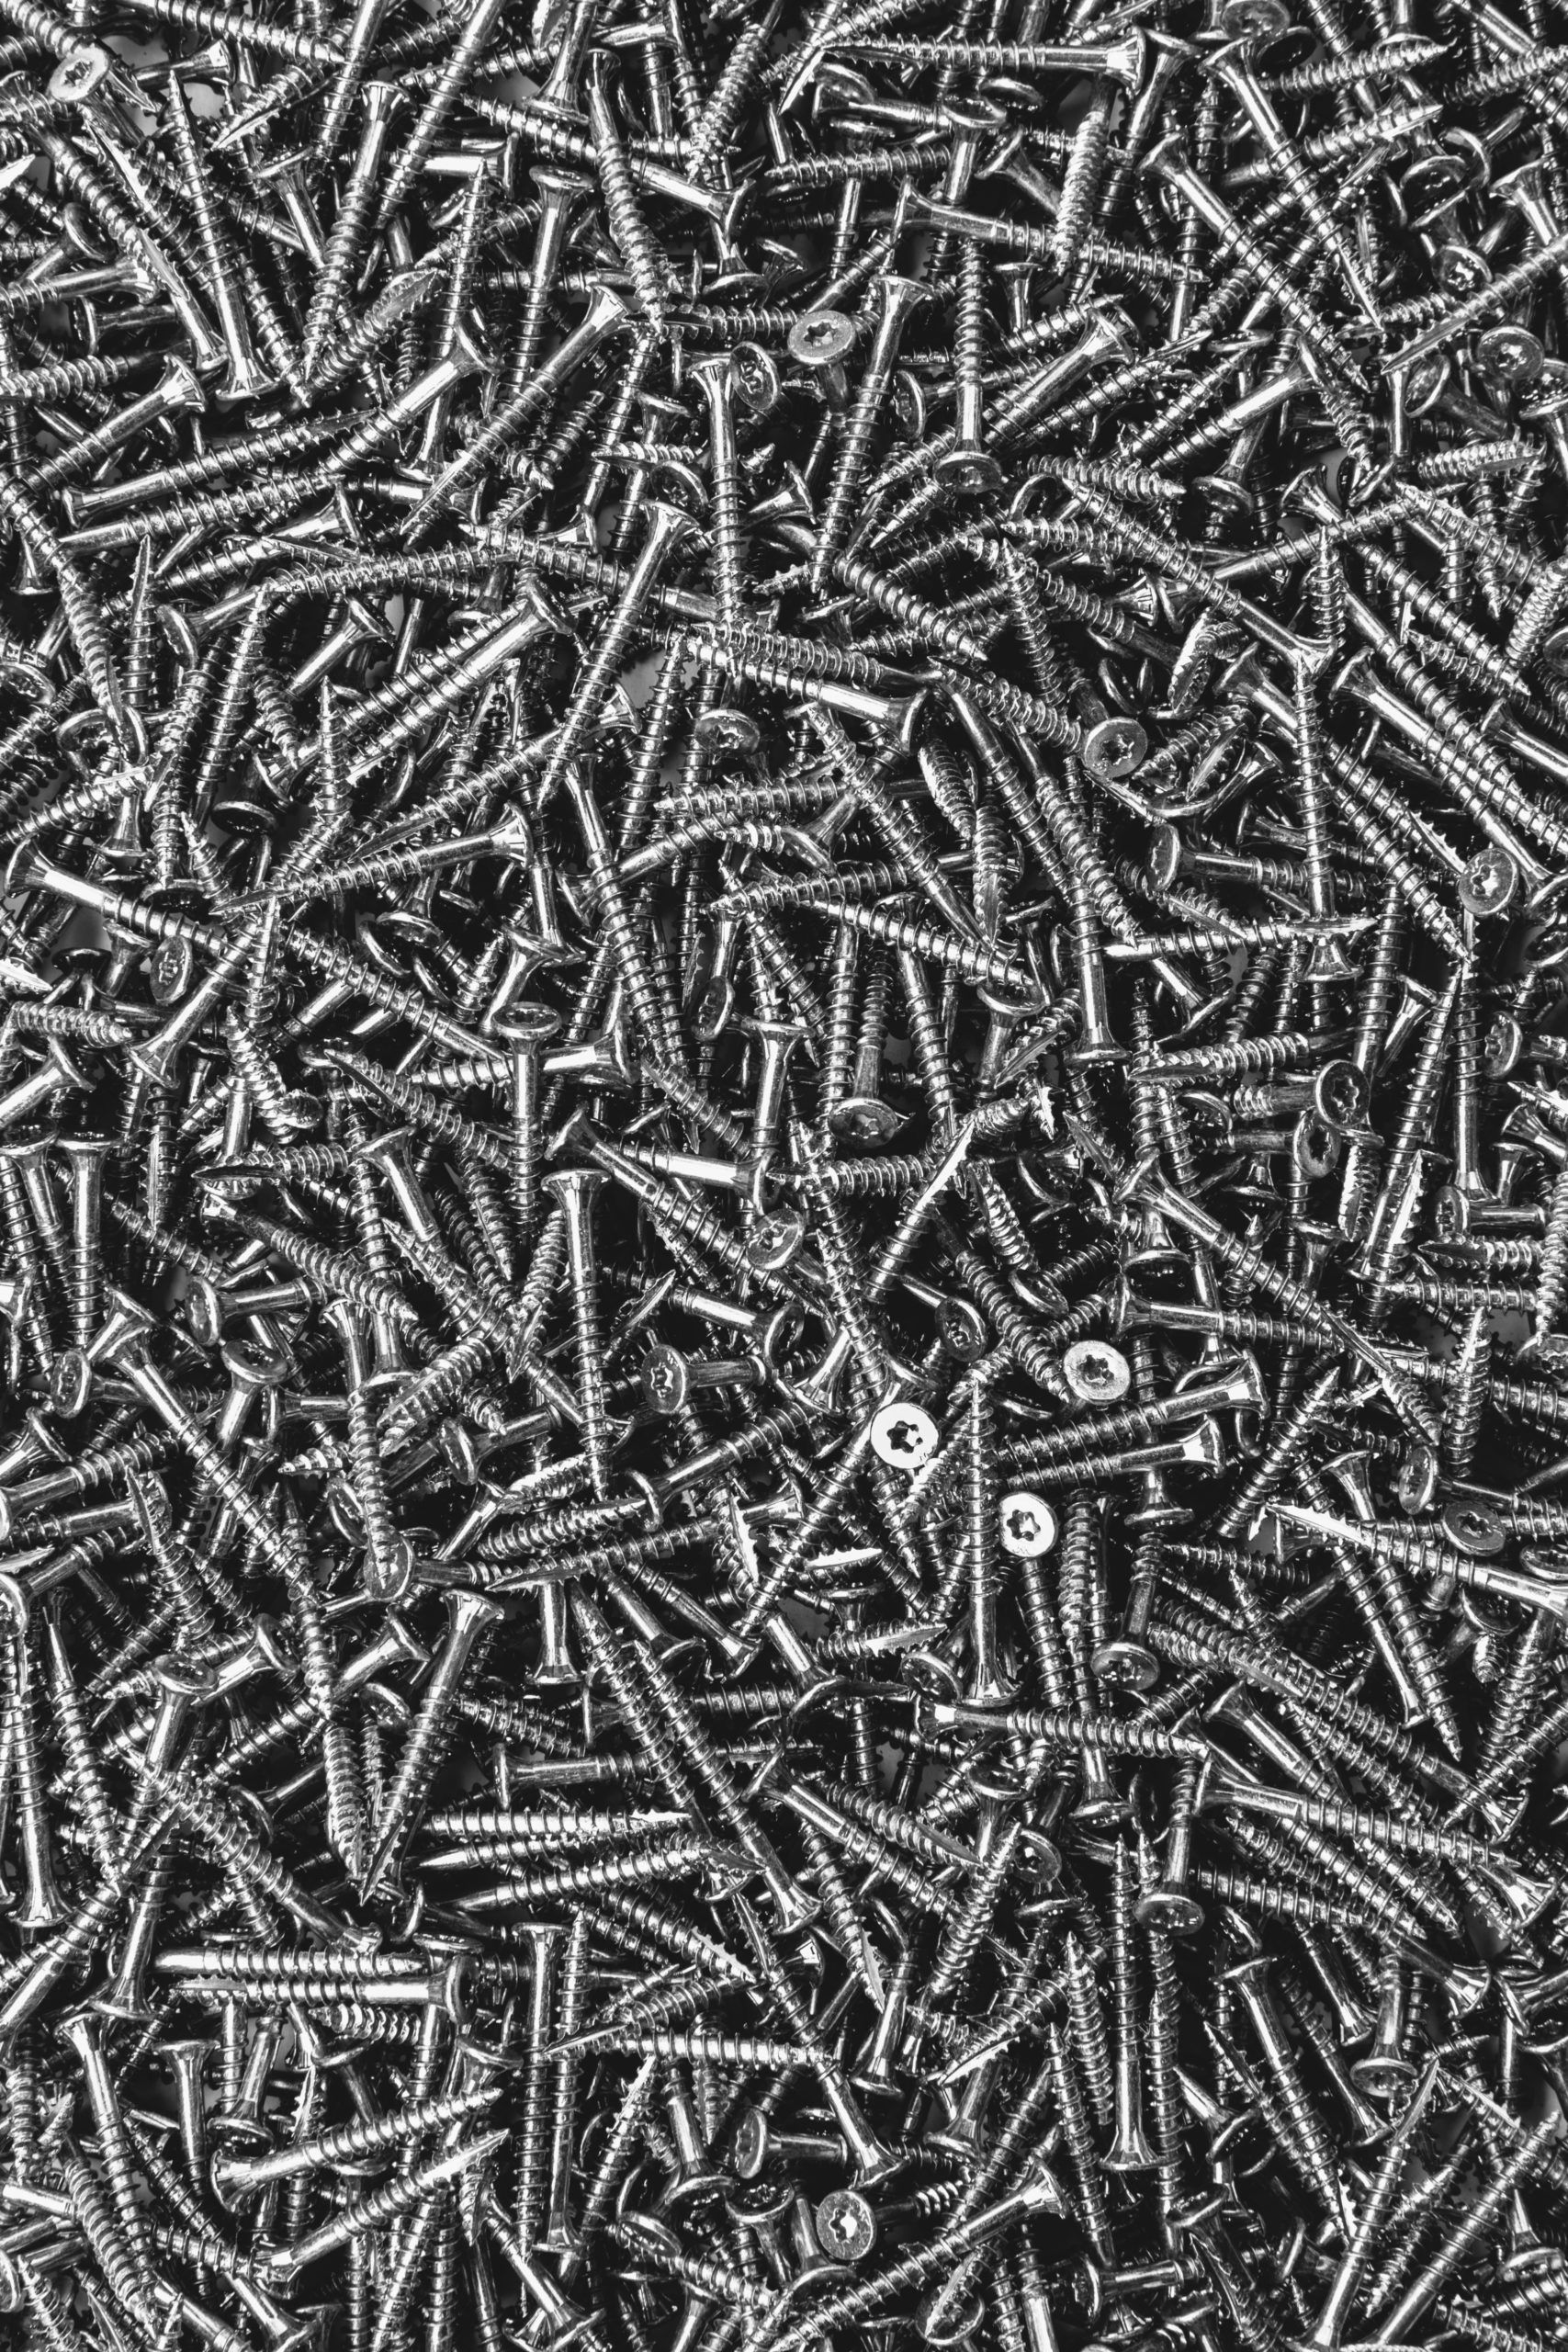 A large heap of grey metal screws, nails with a screw thread.